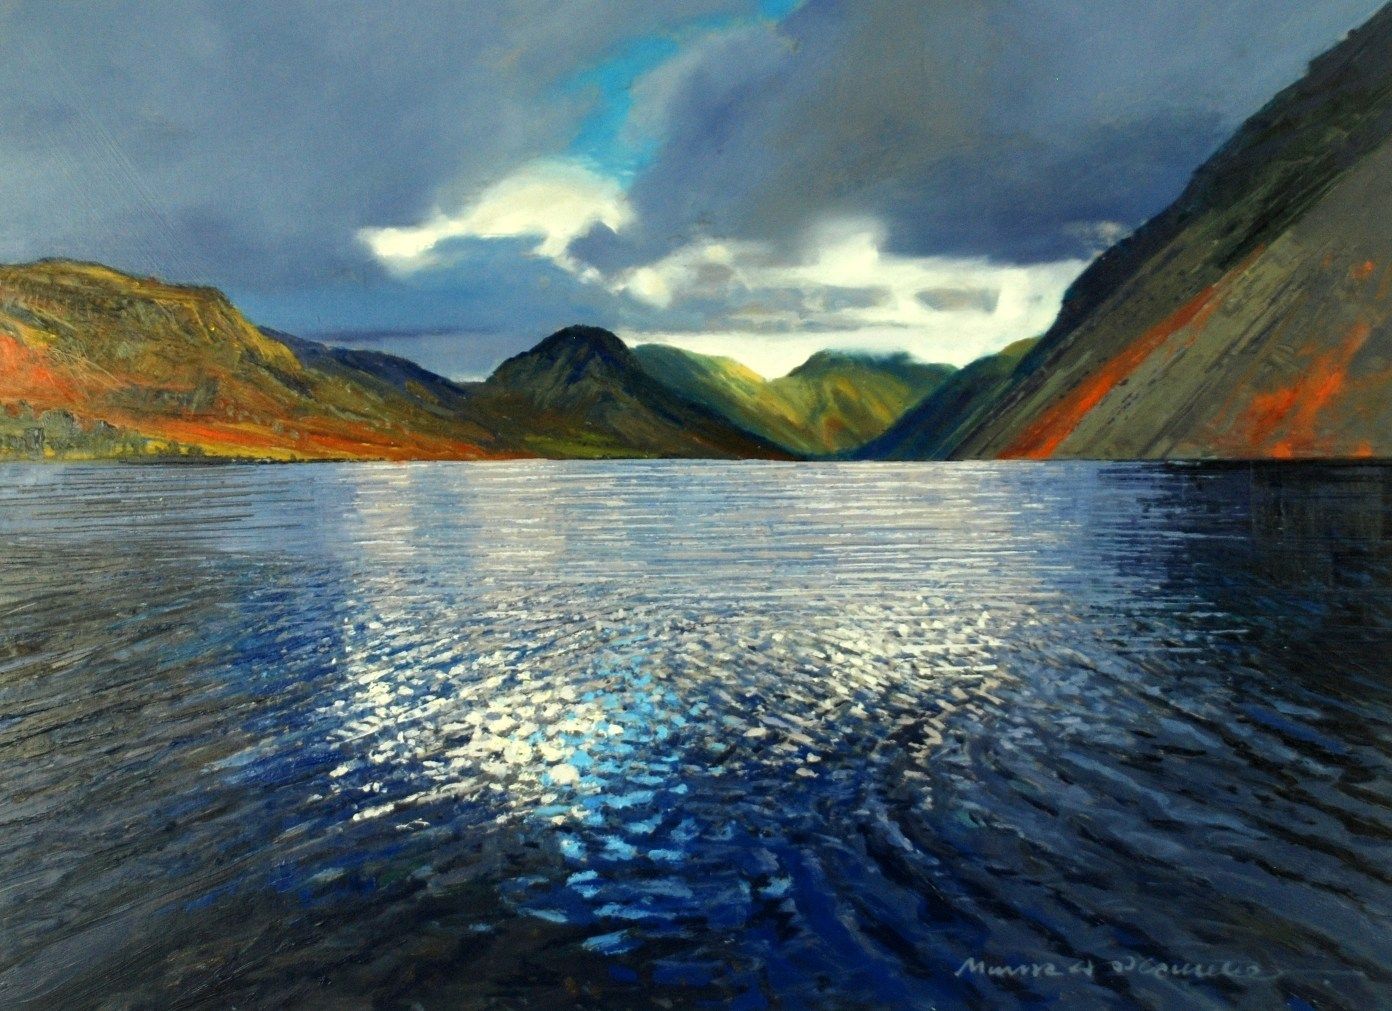 Rain Clouds over Wastwater by Mark A Pearce